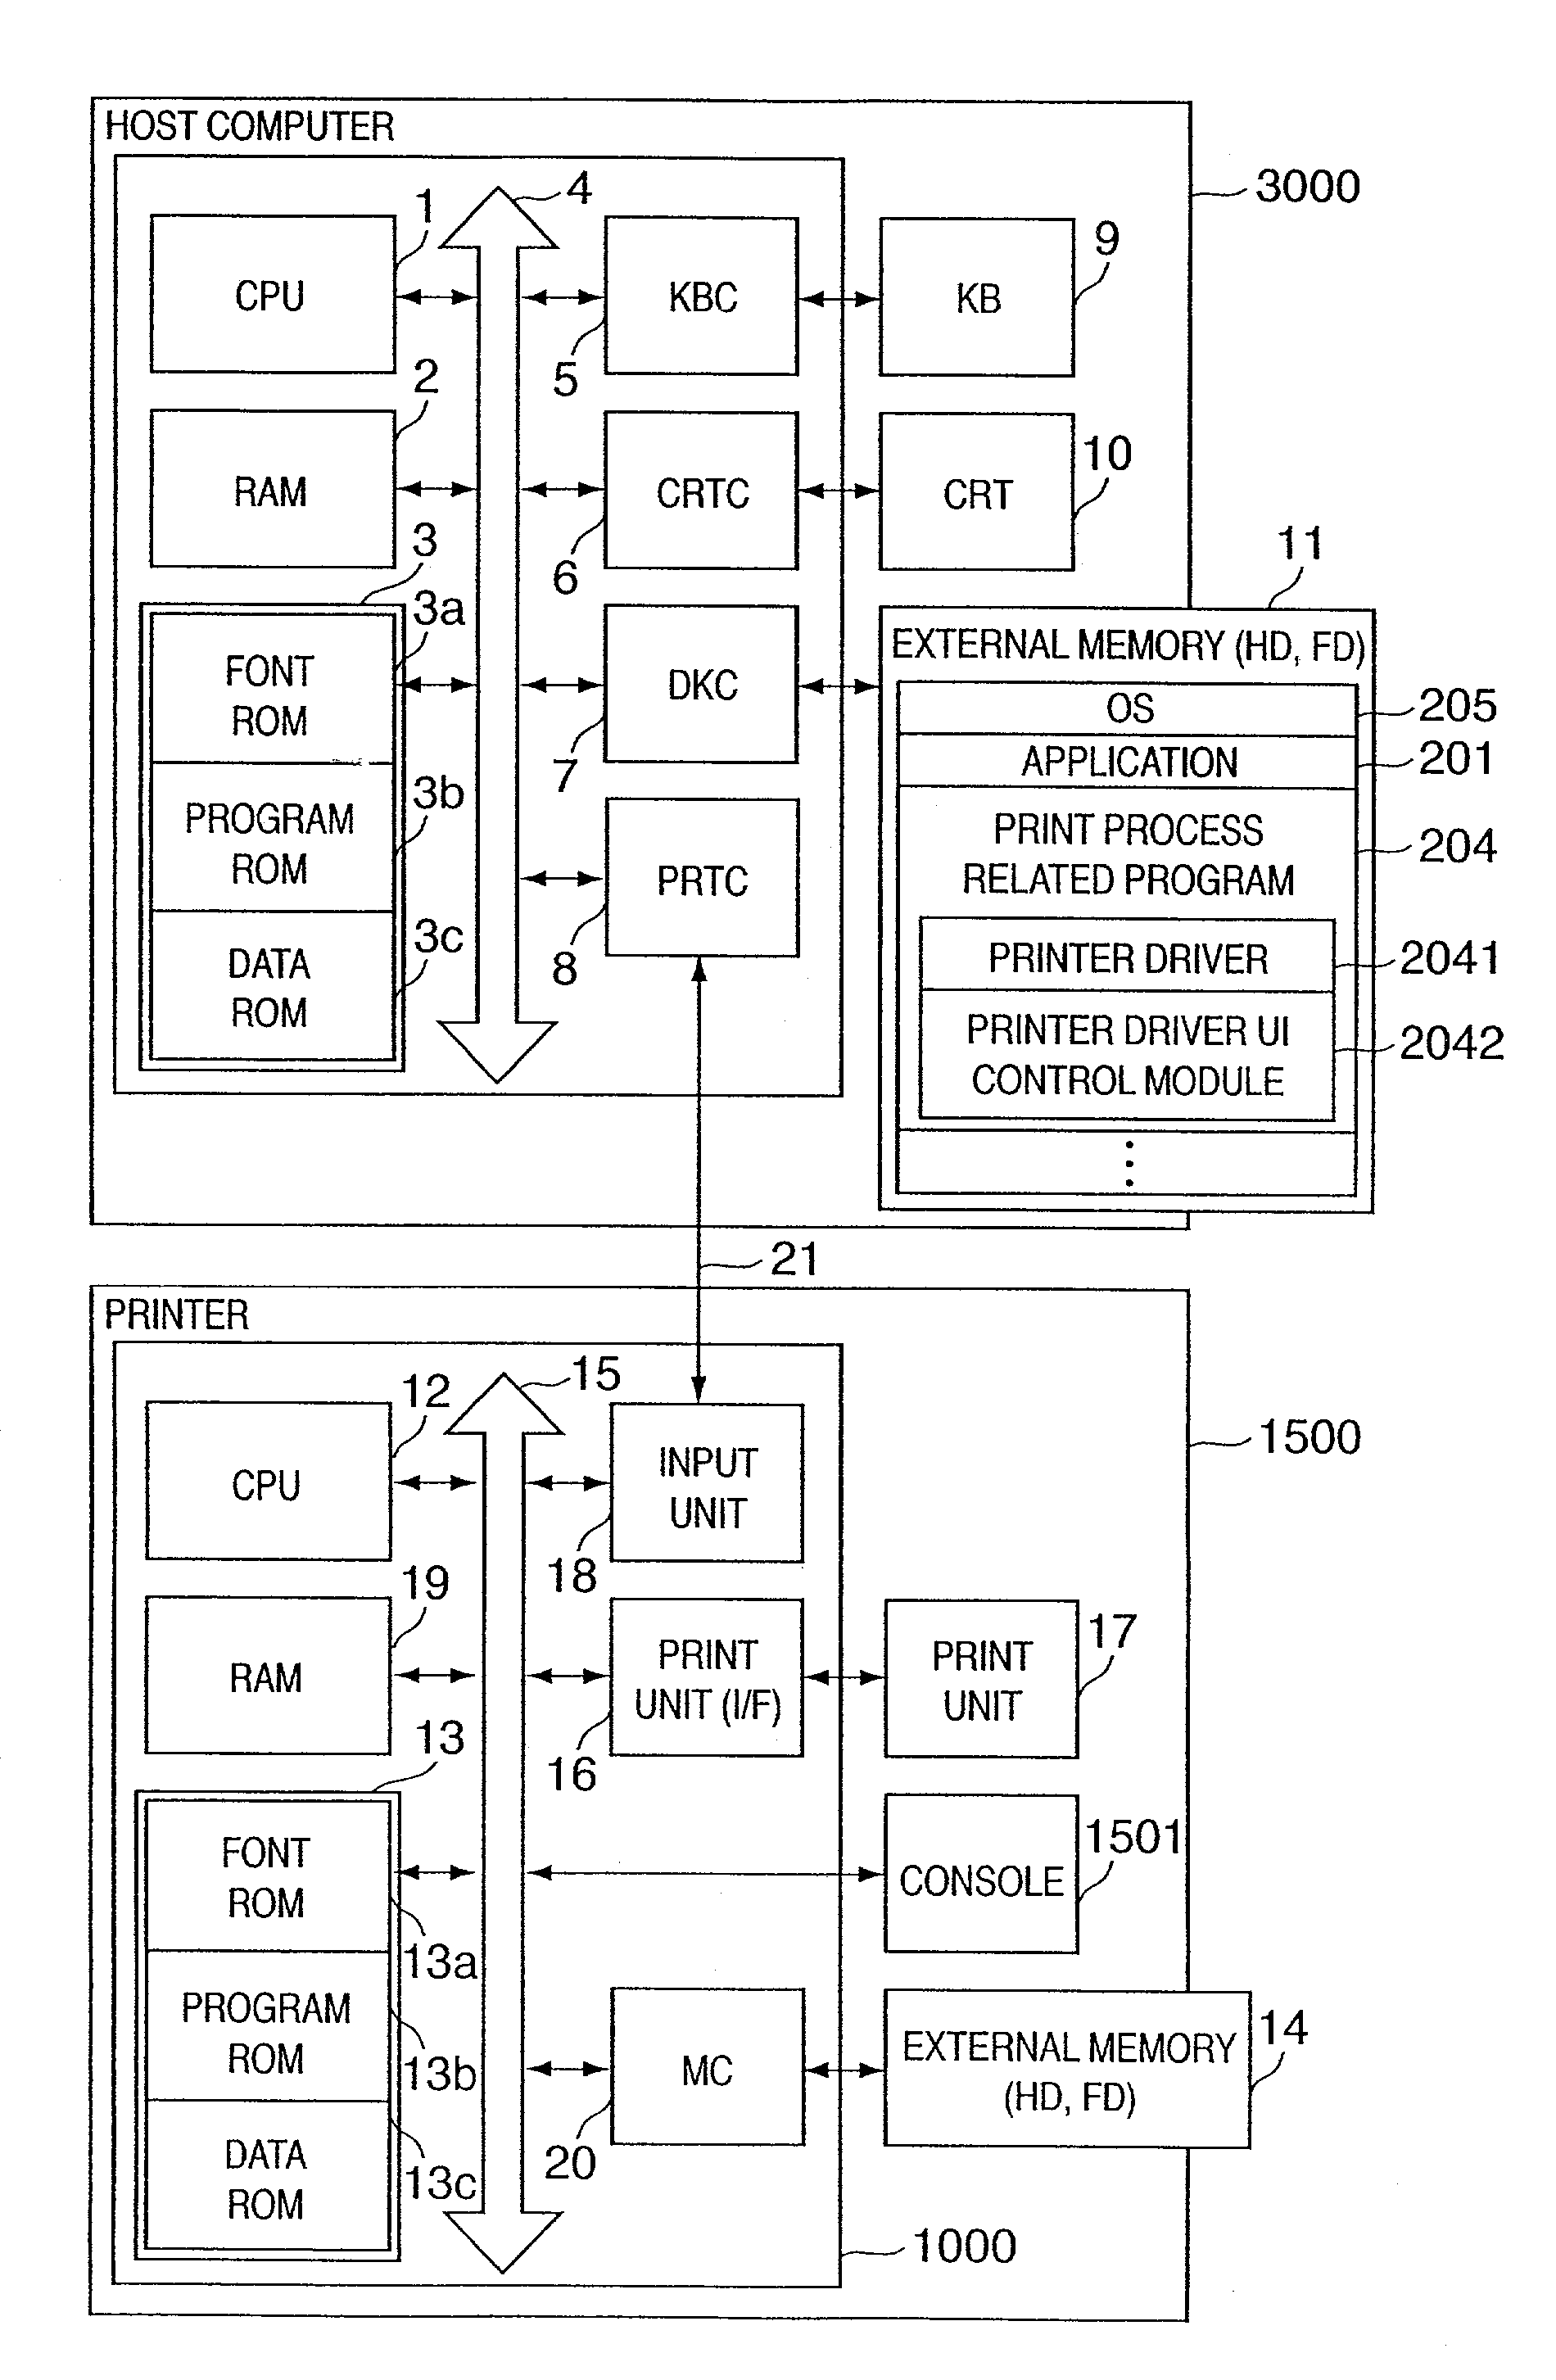 User interface control apparatus and method